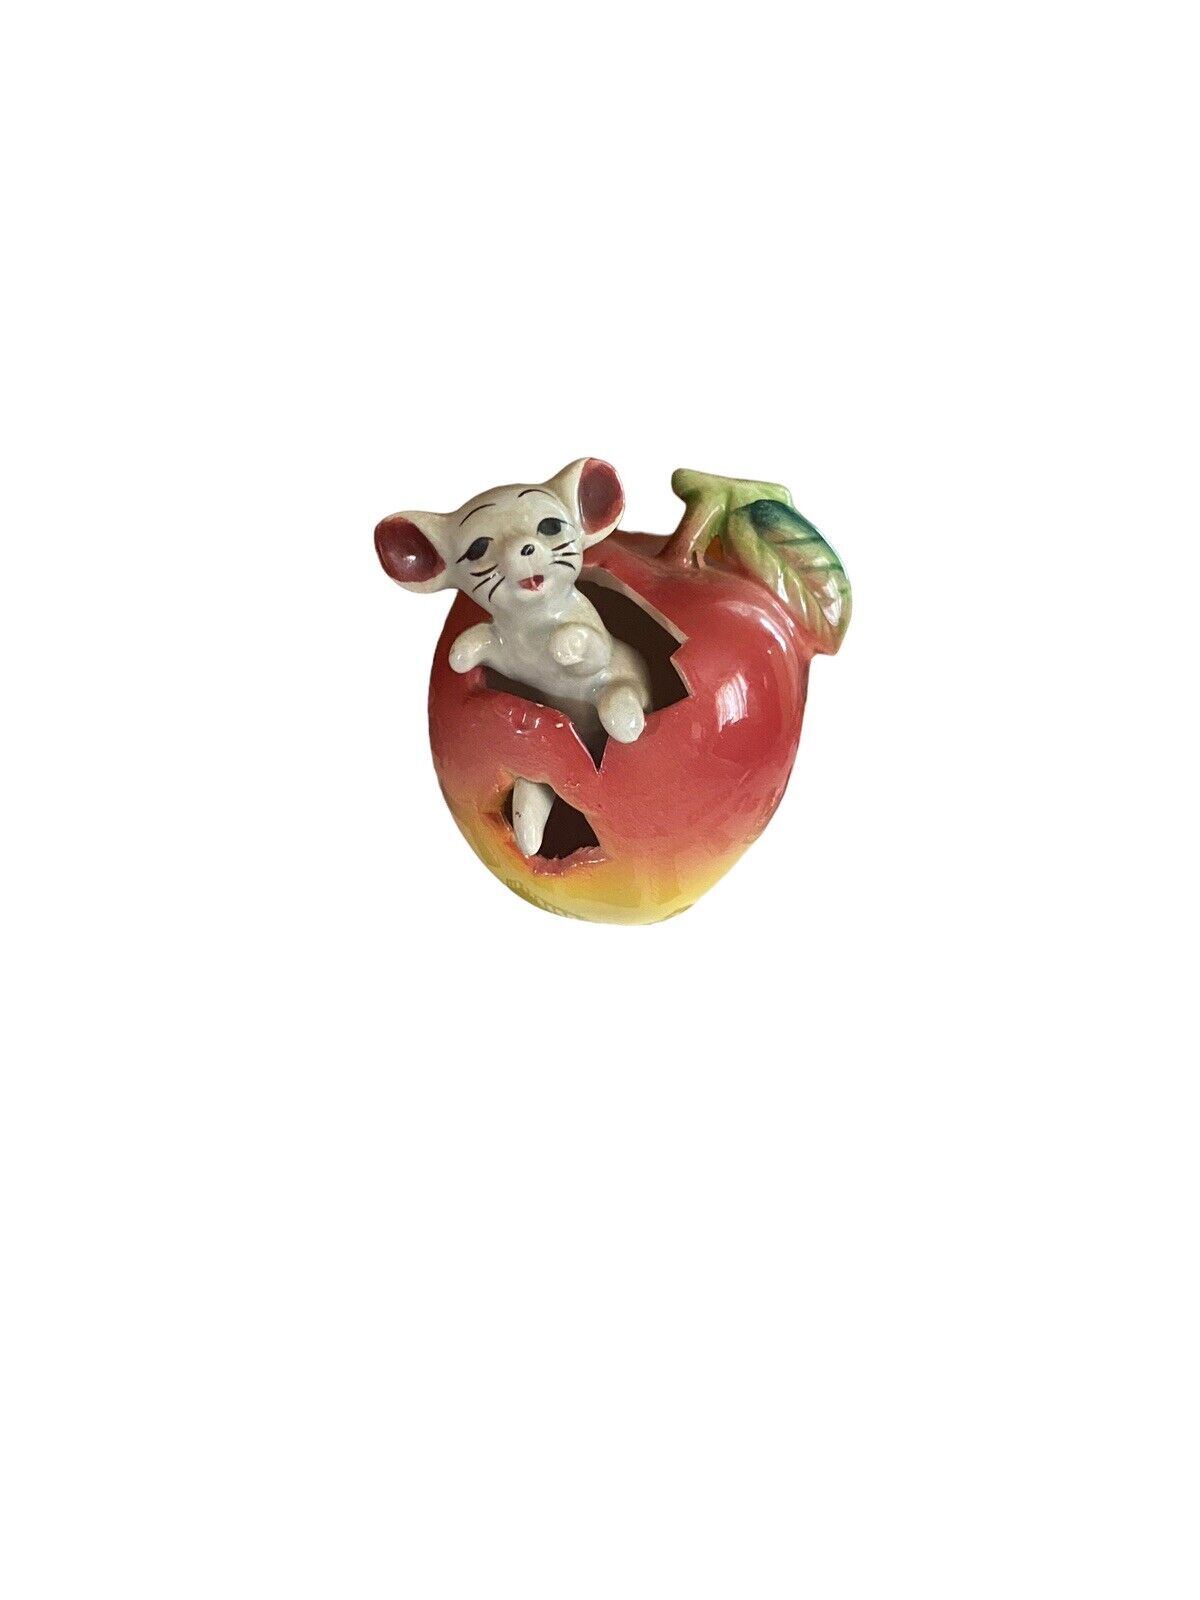 Adorable Anthromorphic Mouse in the Apple Figurine Kitschy Cute Vintage Ceramic